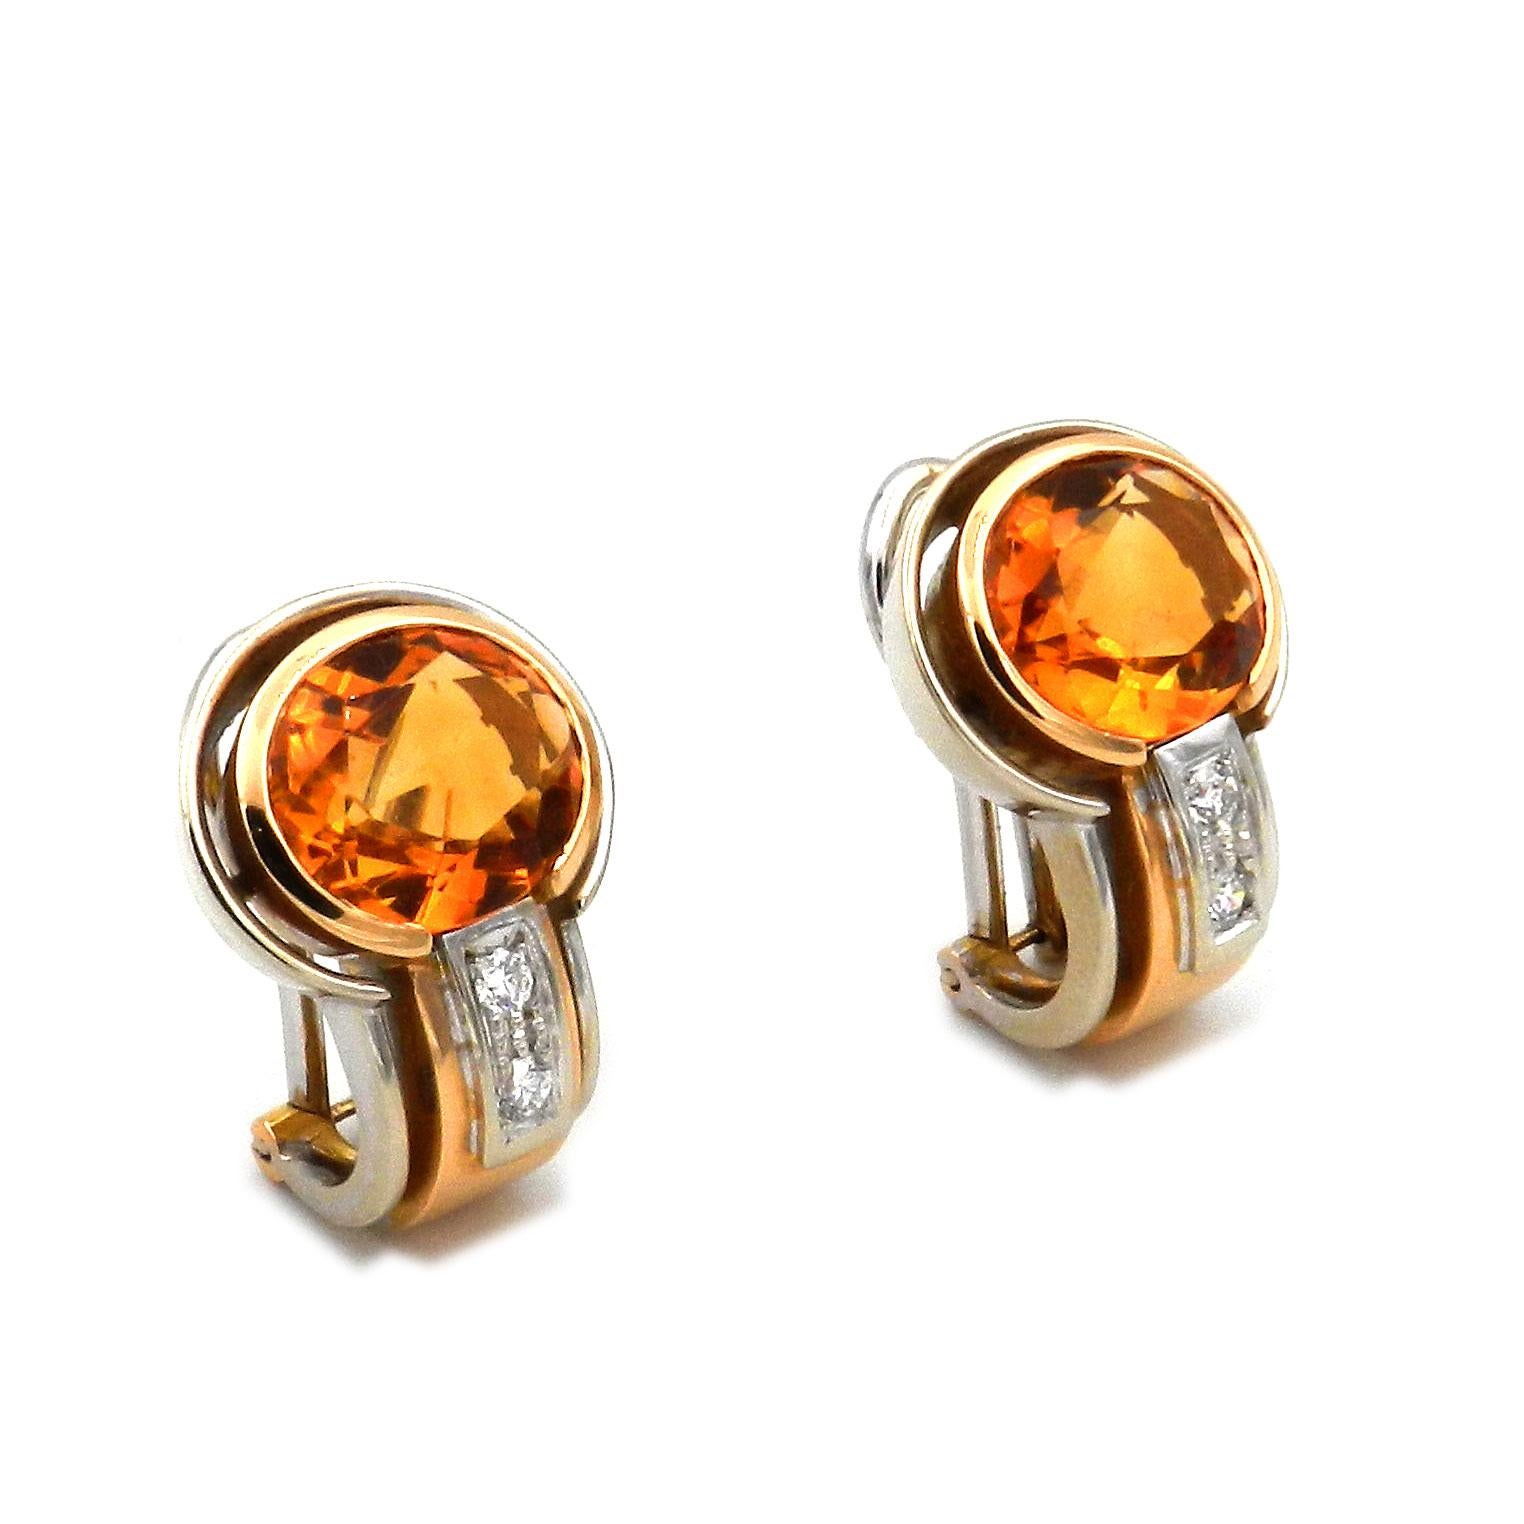 Madeira Citrine Diamond 18 K Two Tone Gold Earrings, Antonini Italy 

Sporty elegant estate earrings in yellow and white gold, studded with a magnificent oval Madeira citrine of intense color and accentuated with two radiant diamonds each. Completed